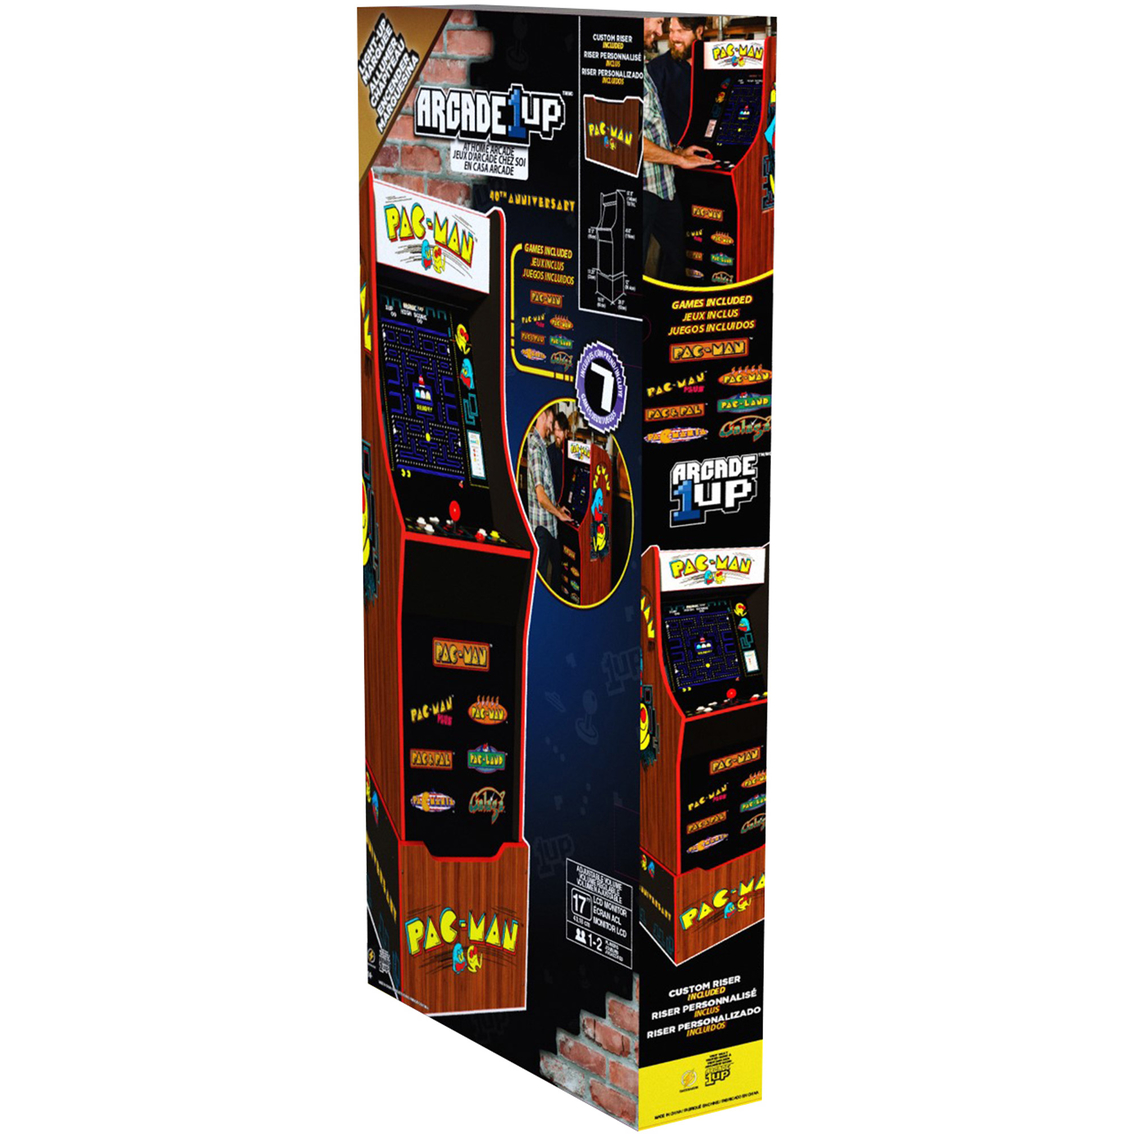 Arcade 1Up Arcade1Up Pac-Man 40th Anniversary Special Edition Arcade Game Machine with Marquee Riser and Stool Electronic Games 815221021419 